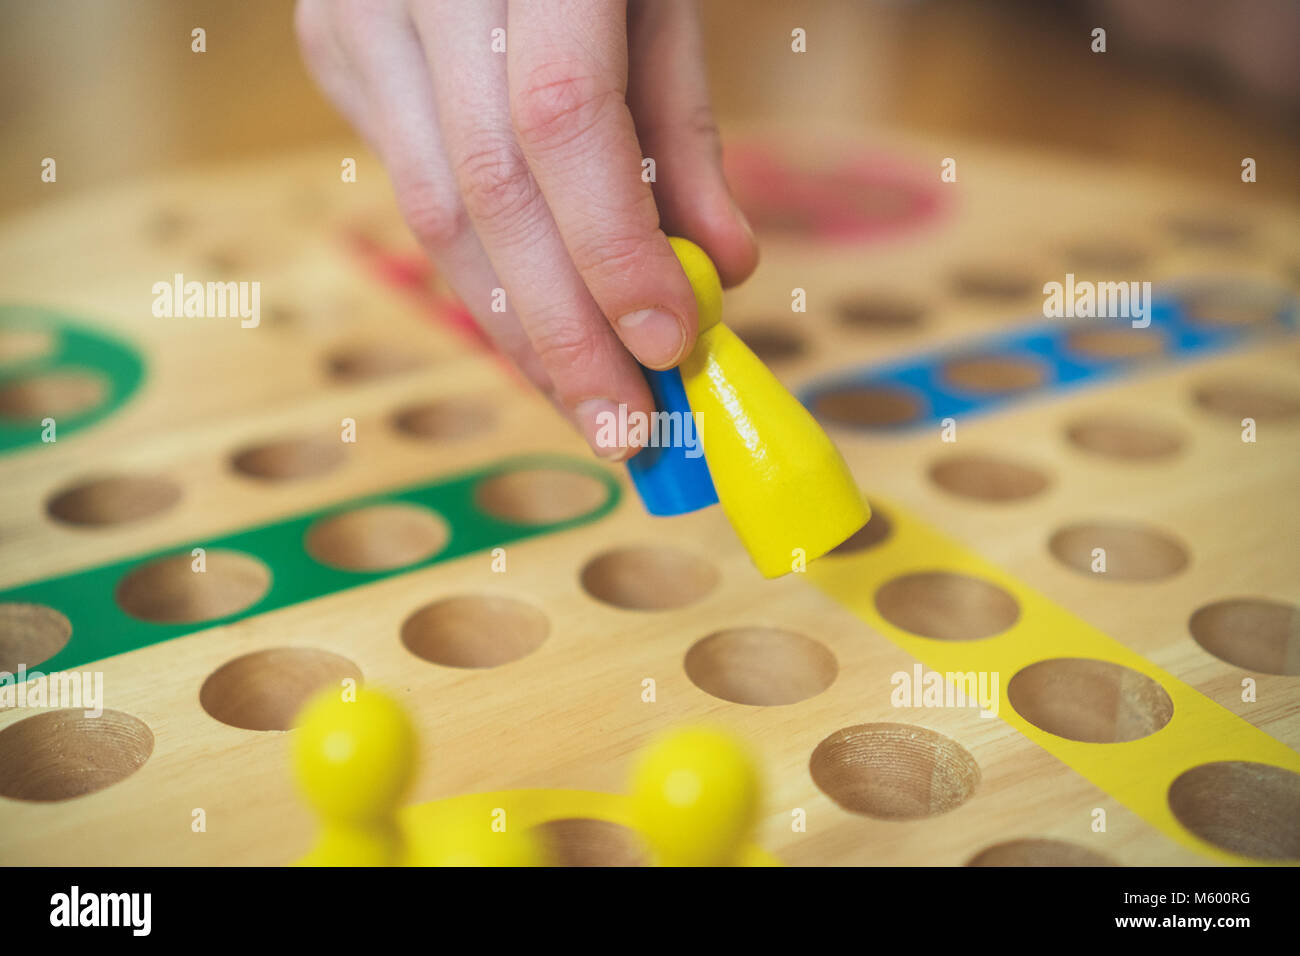 Child playing Ludo board game. Close-up view. Stock Photo